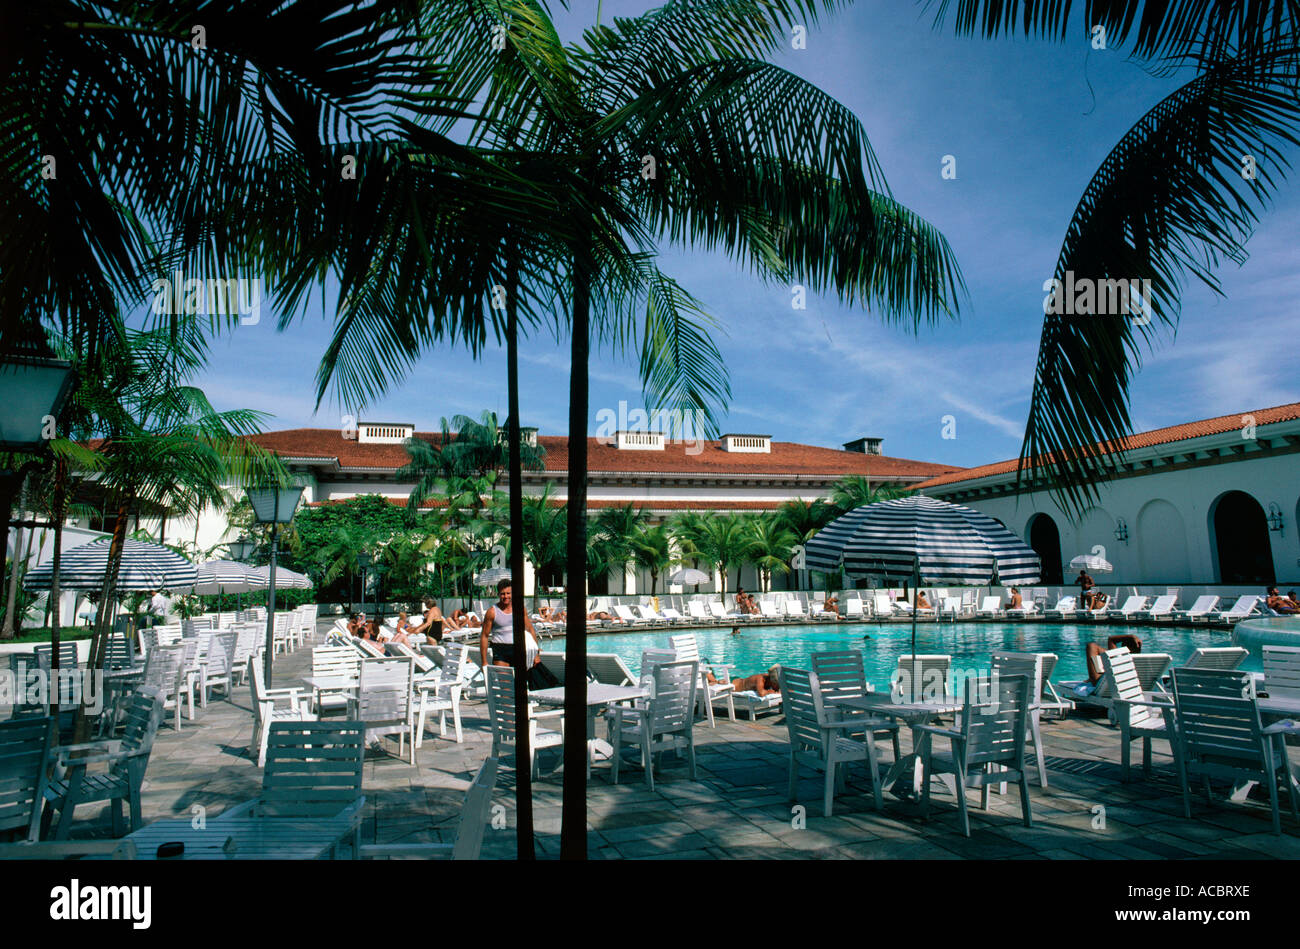 swimmingpool of hotel tropical city of manaus state of amazonia brazil editorial use only Stock Photo